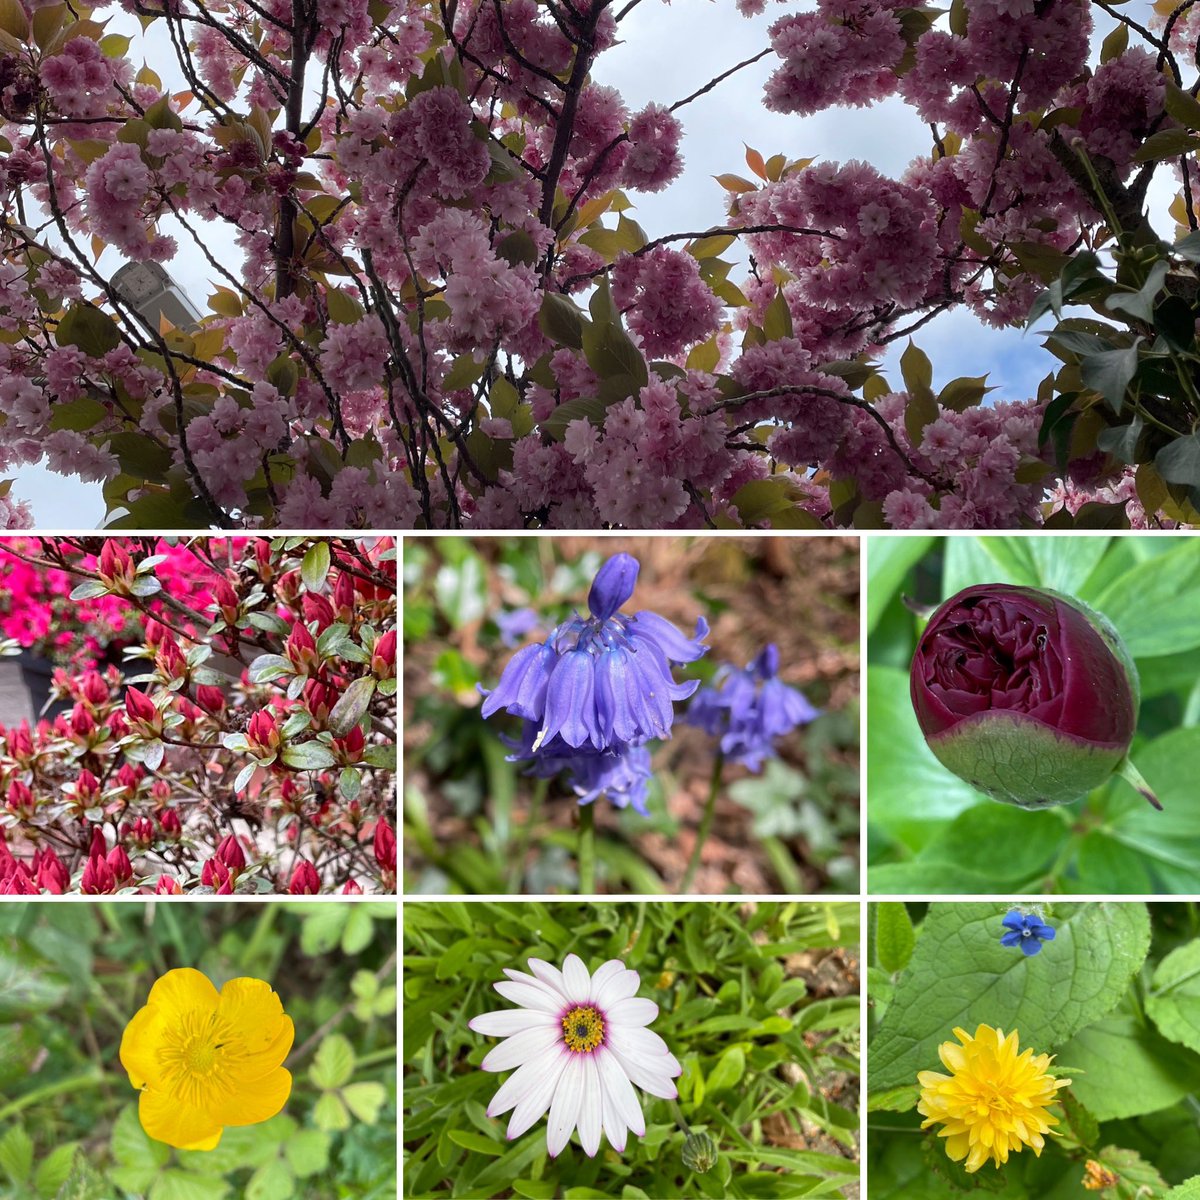 #SevenOnSunday all taken during this morning’s run - so nice to see so many beautiful blooms! #Flowers #flowerphotography #NatureBeauty #runningmotivation